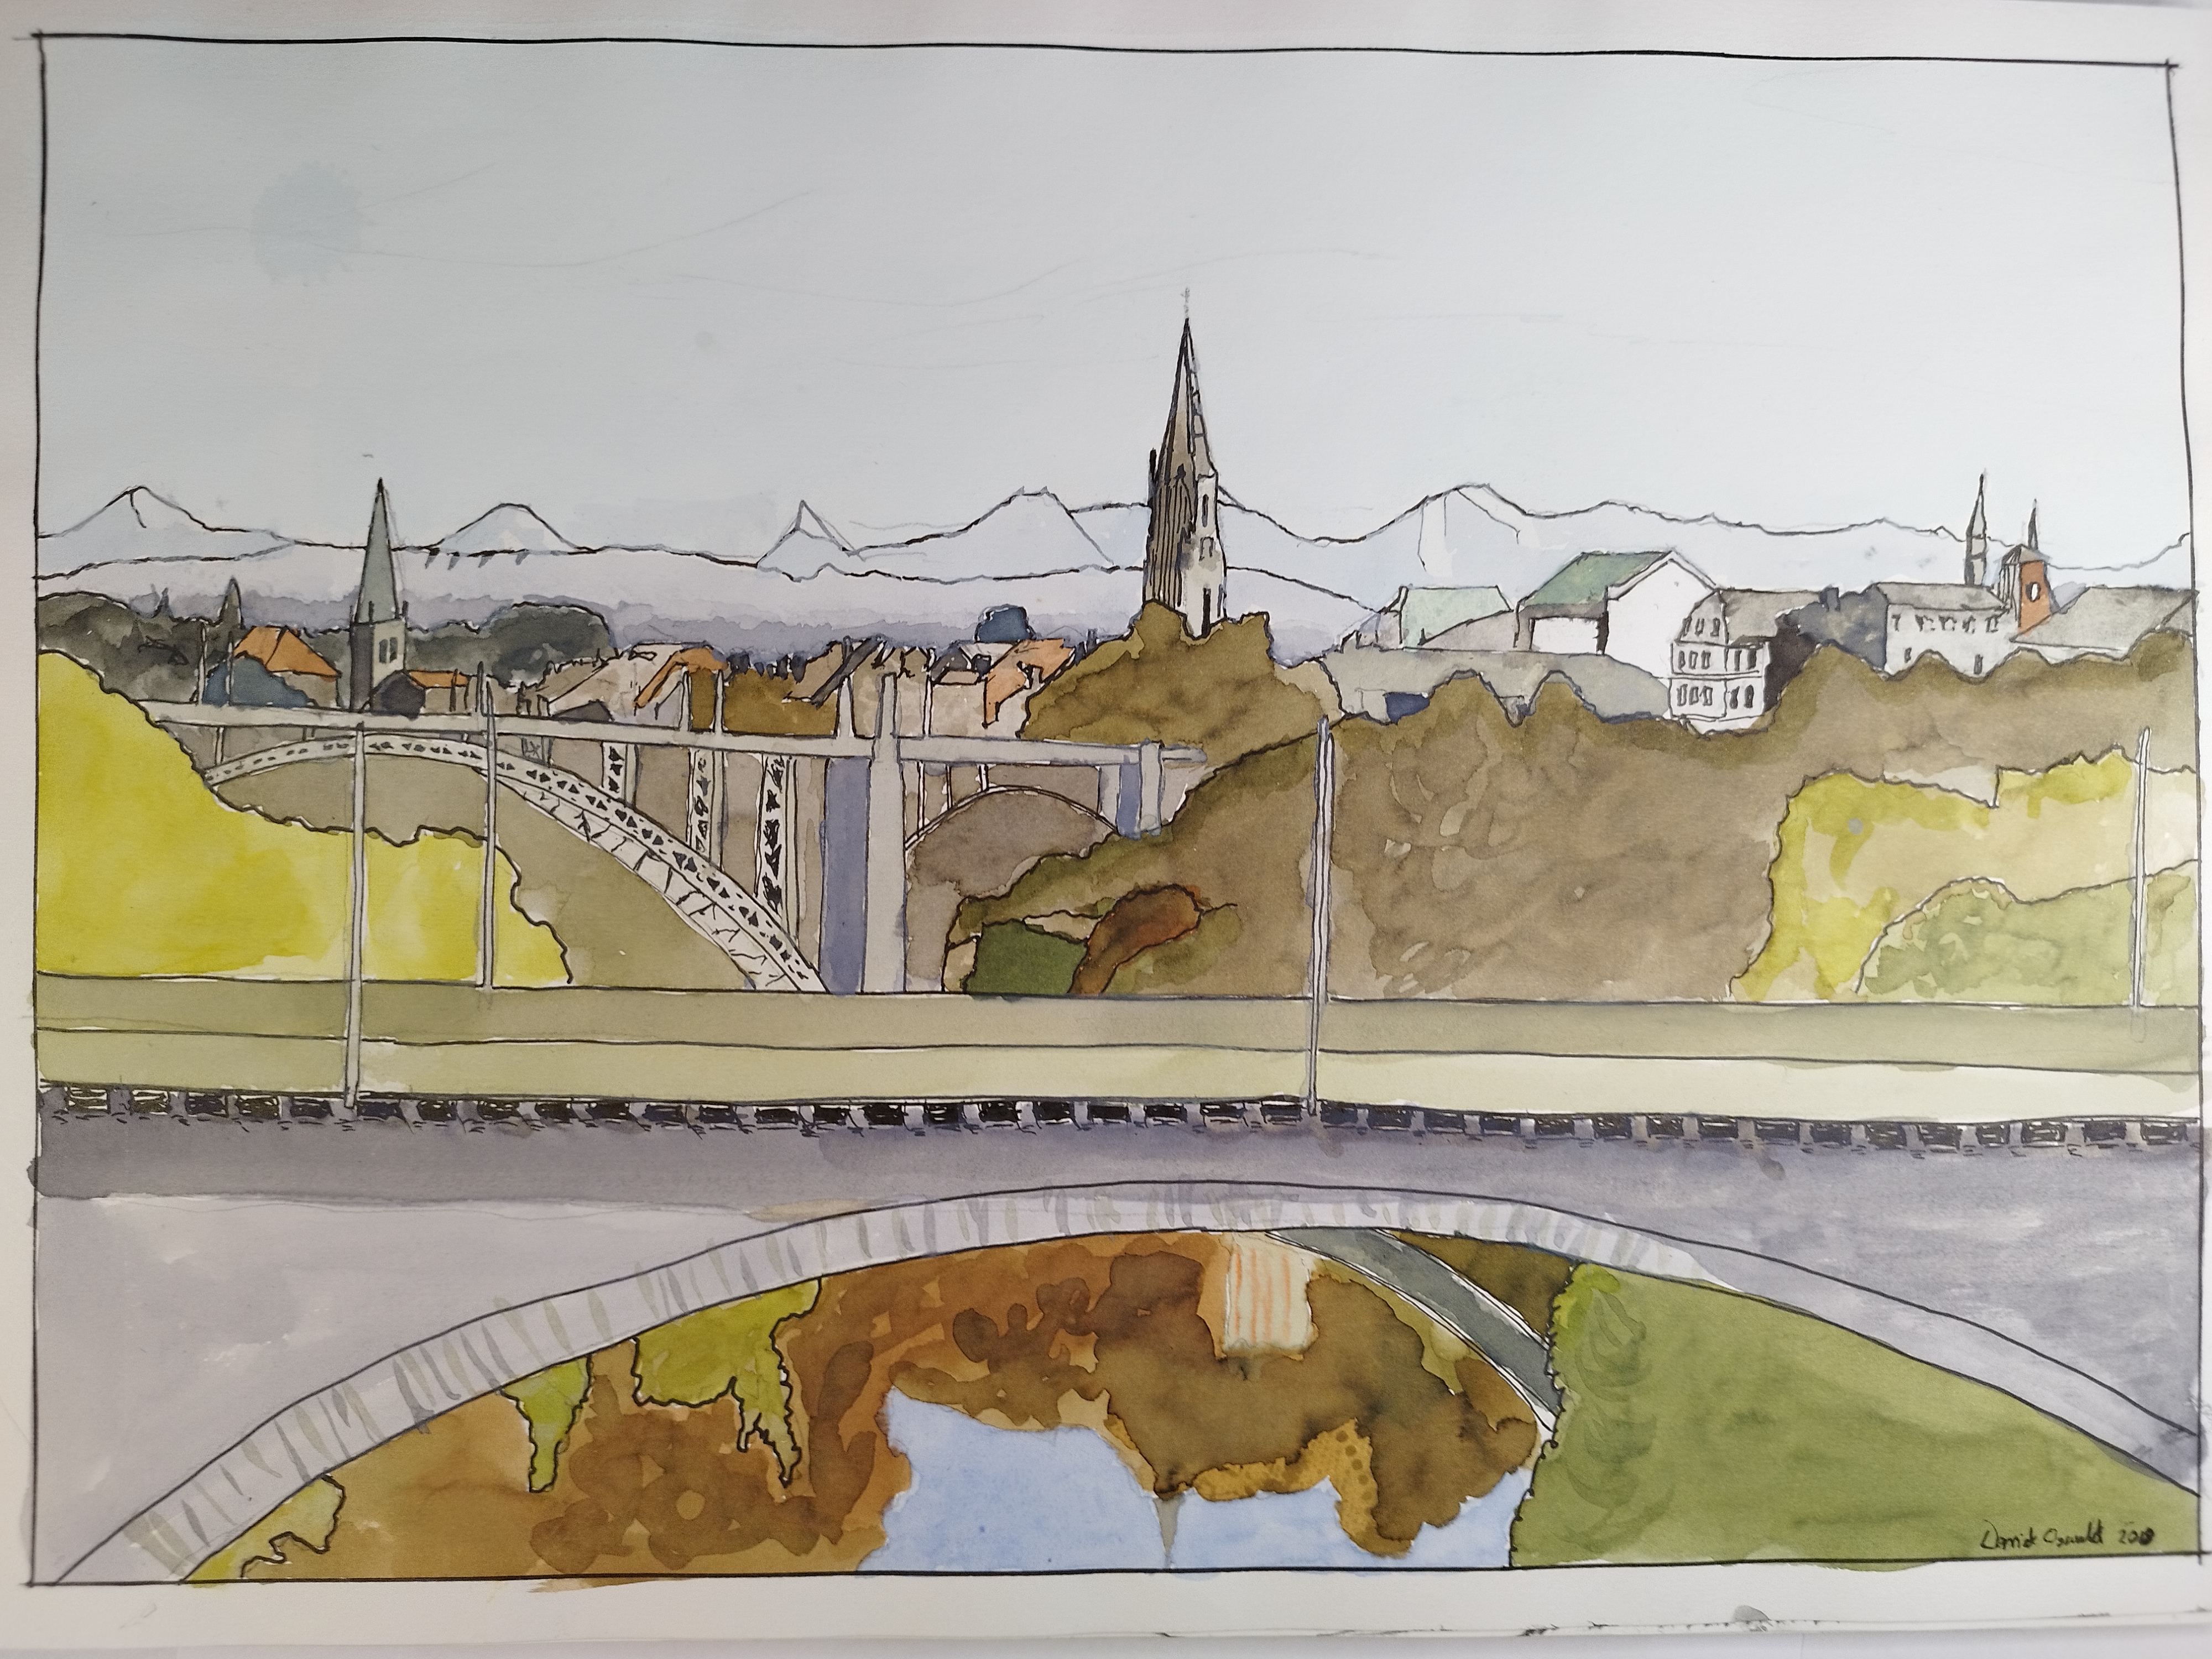 watercolor of Bern, Switzerland from the viewpoint of a train crossing the Lorraineviadukt